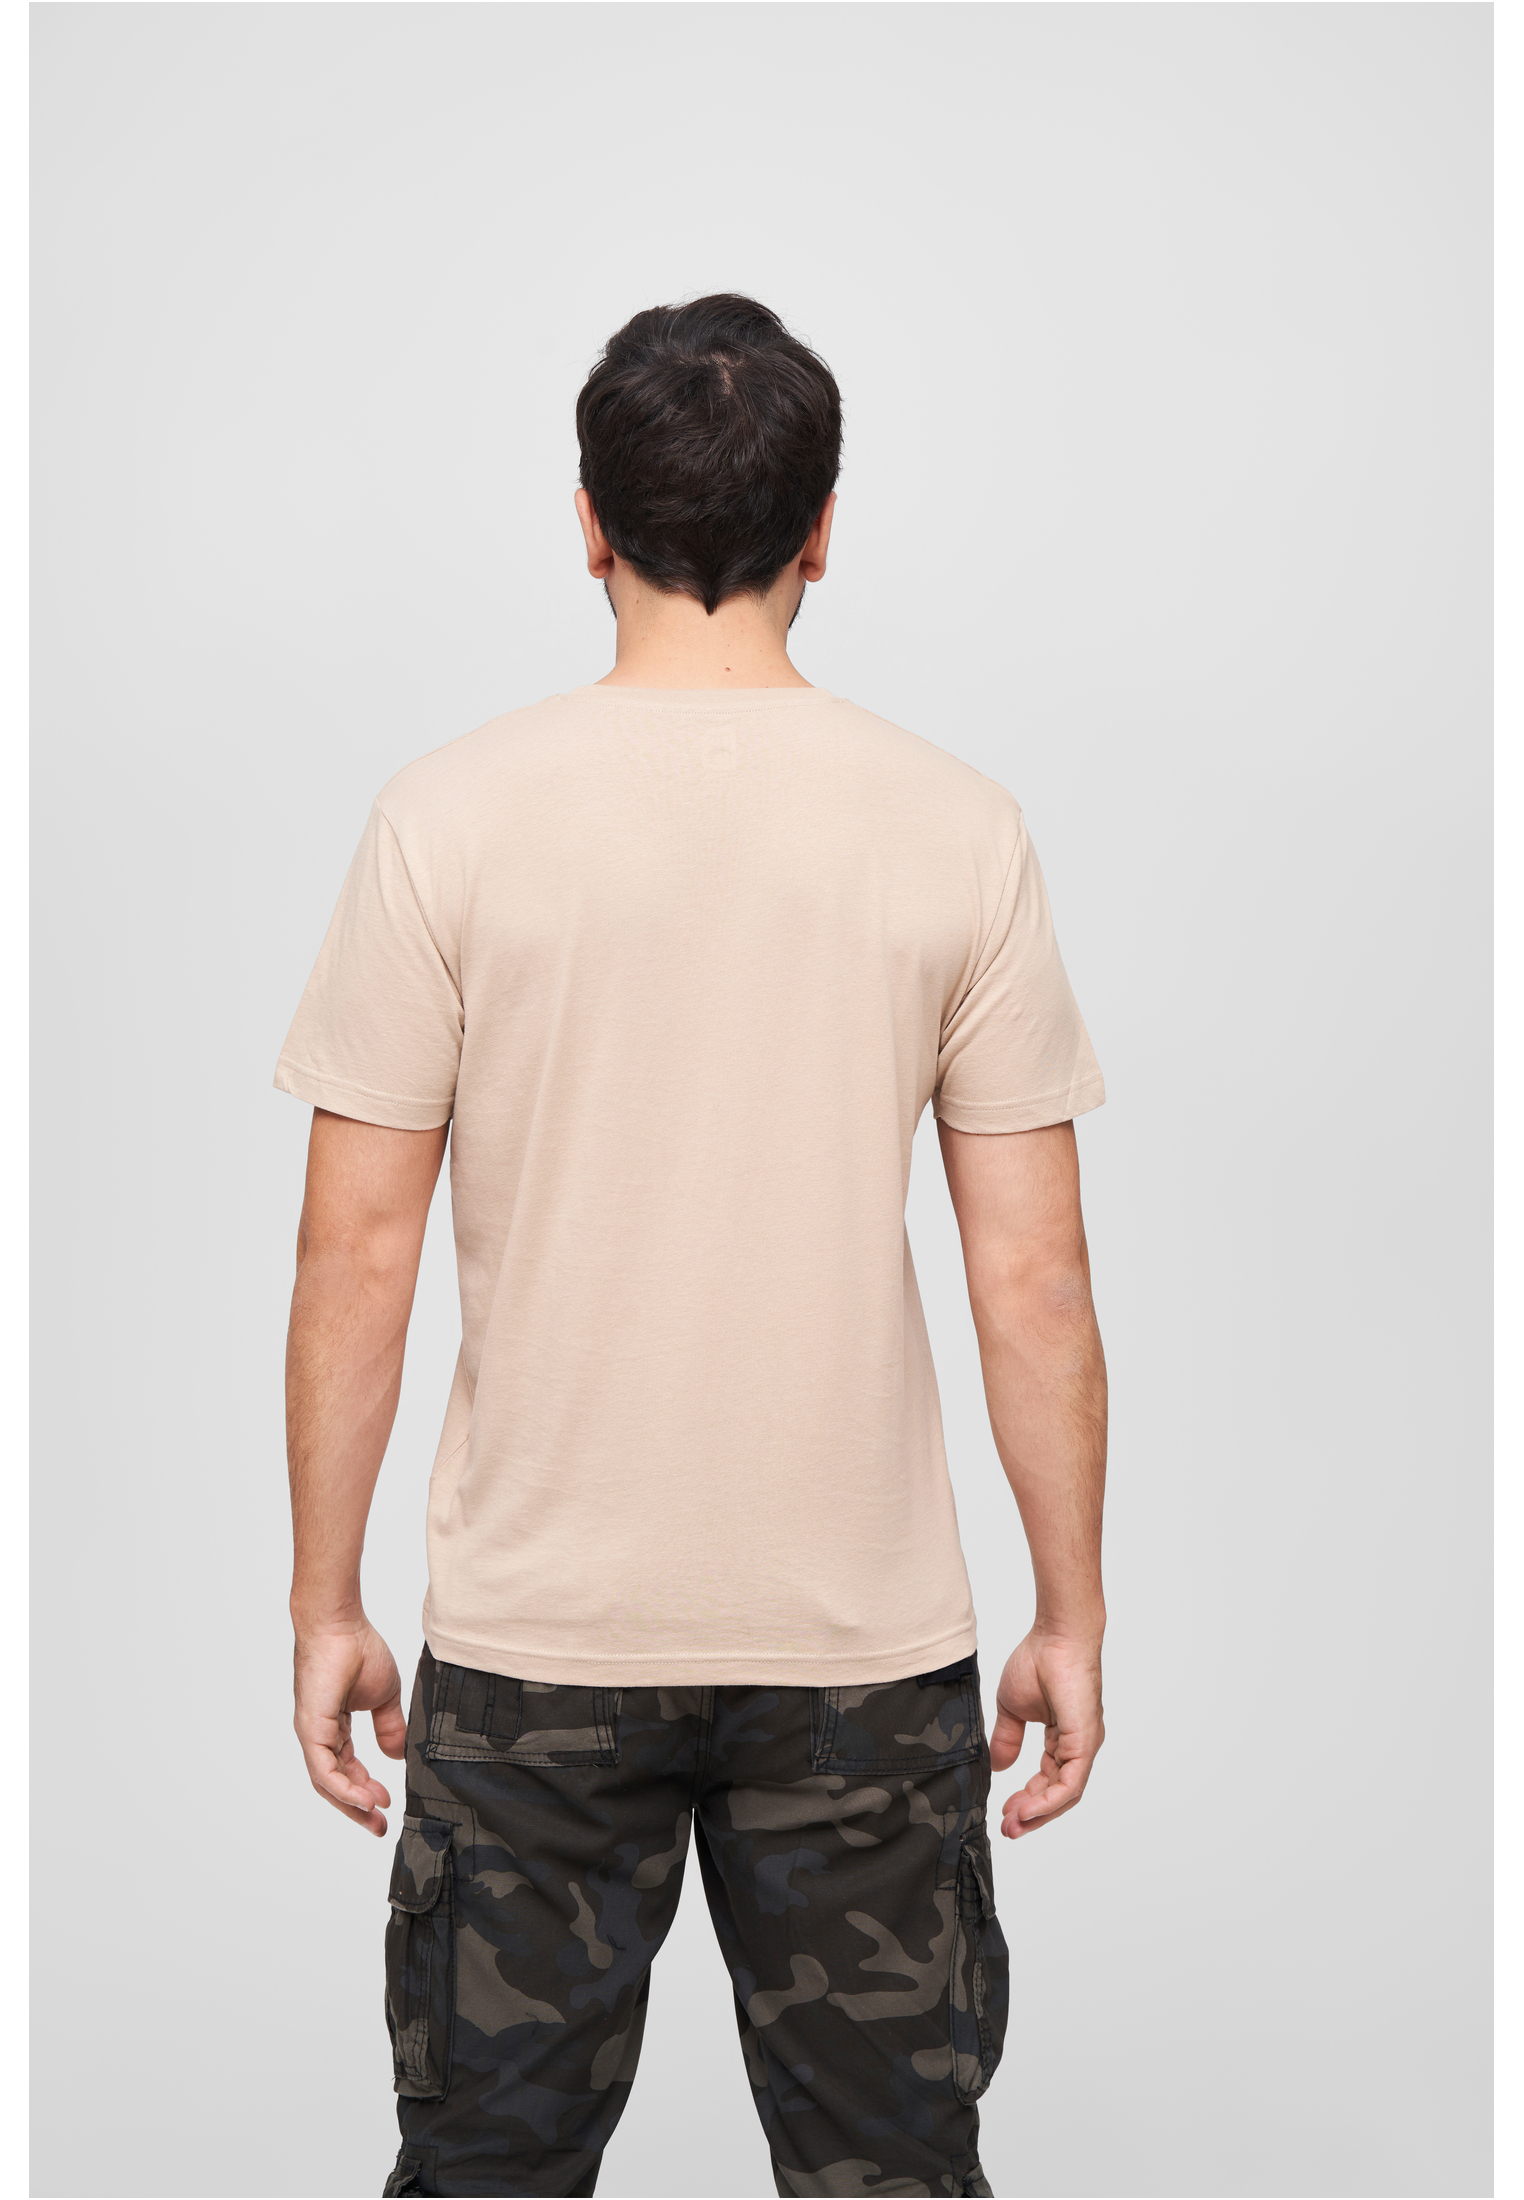 T-Shirts T-Shirt in Farbe beige